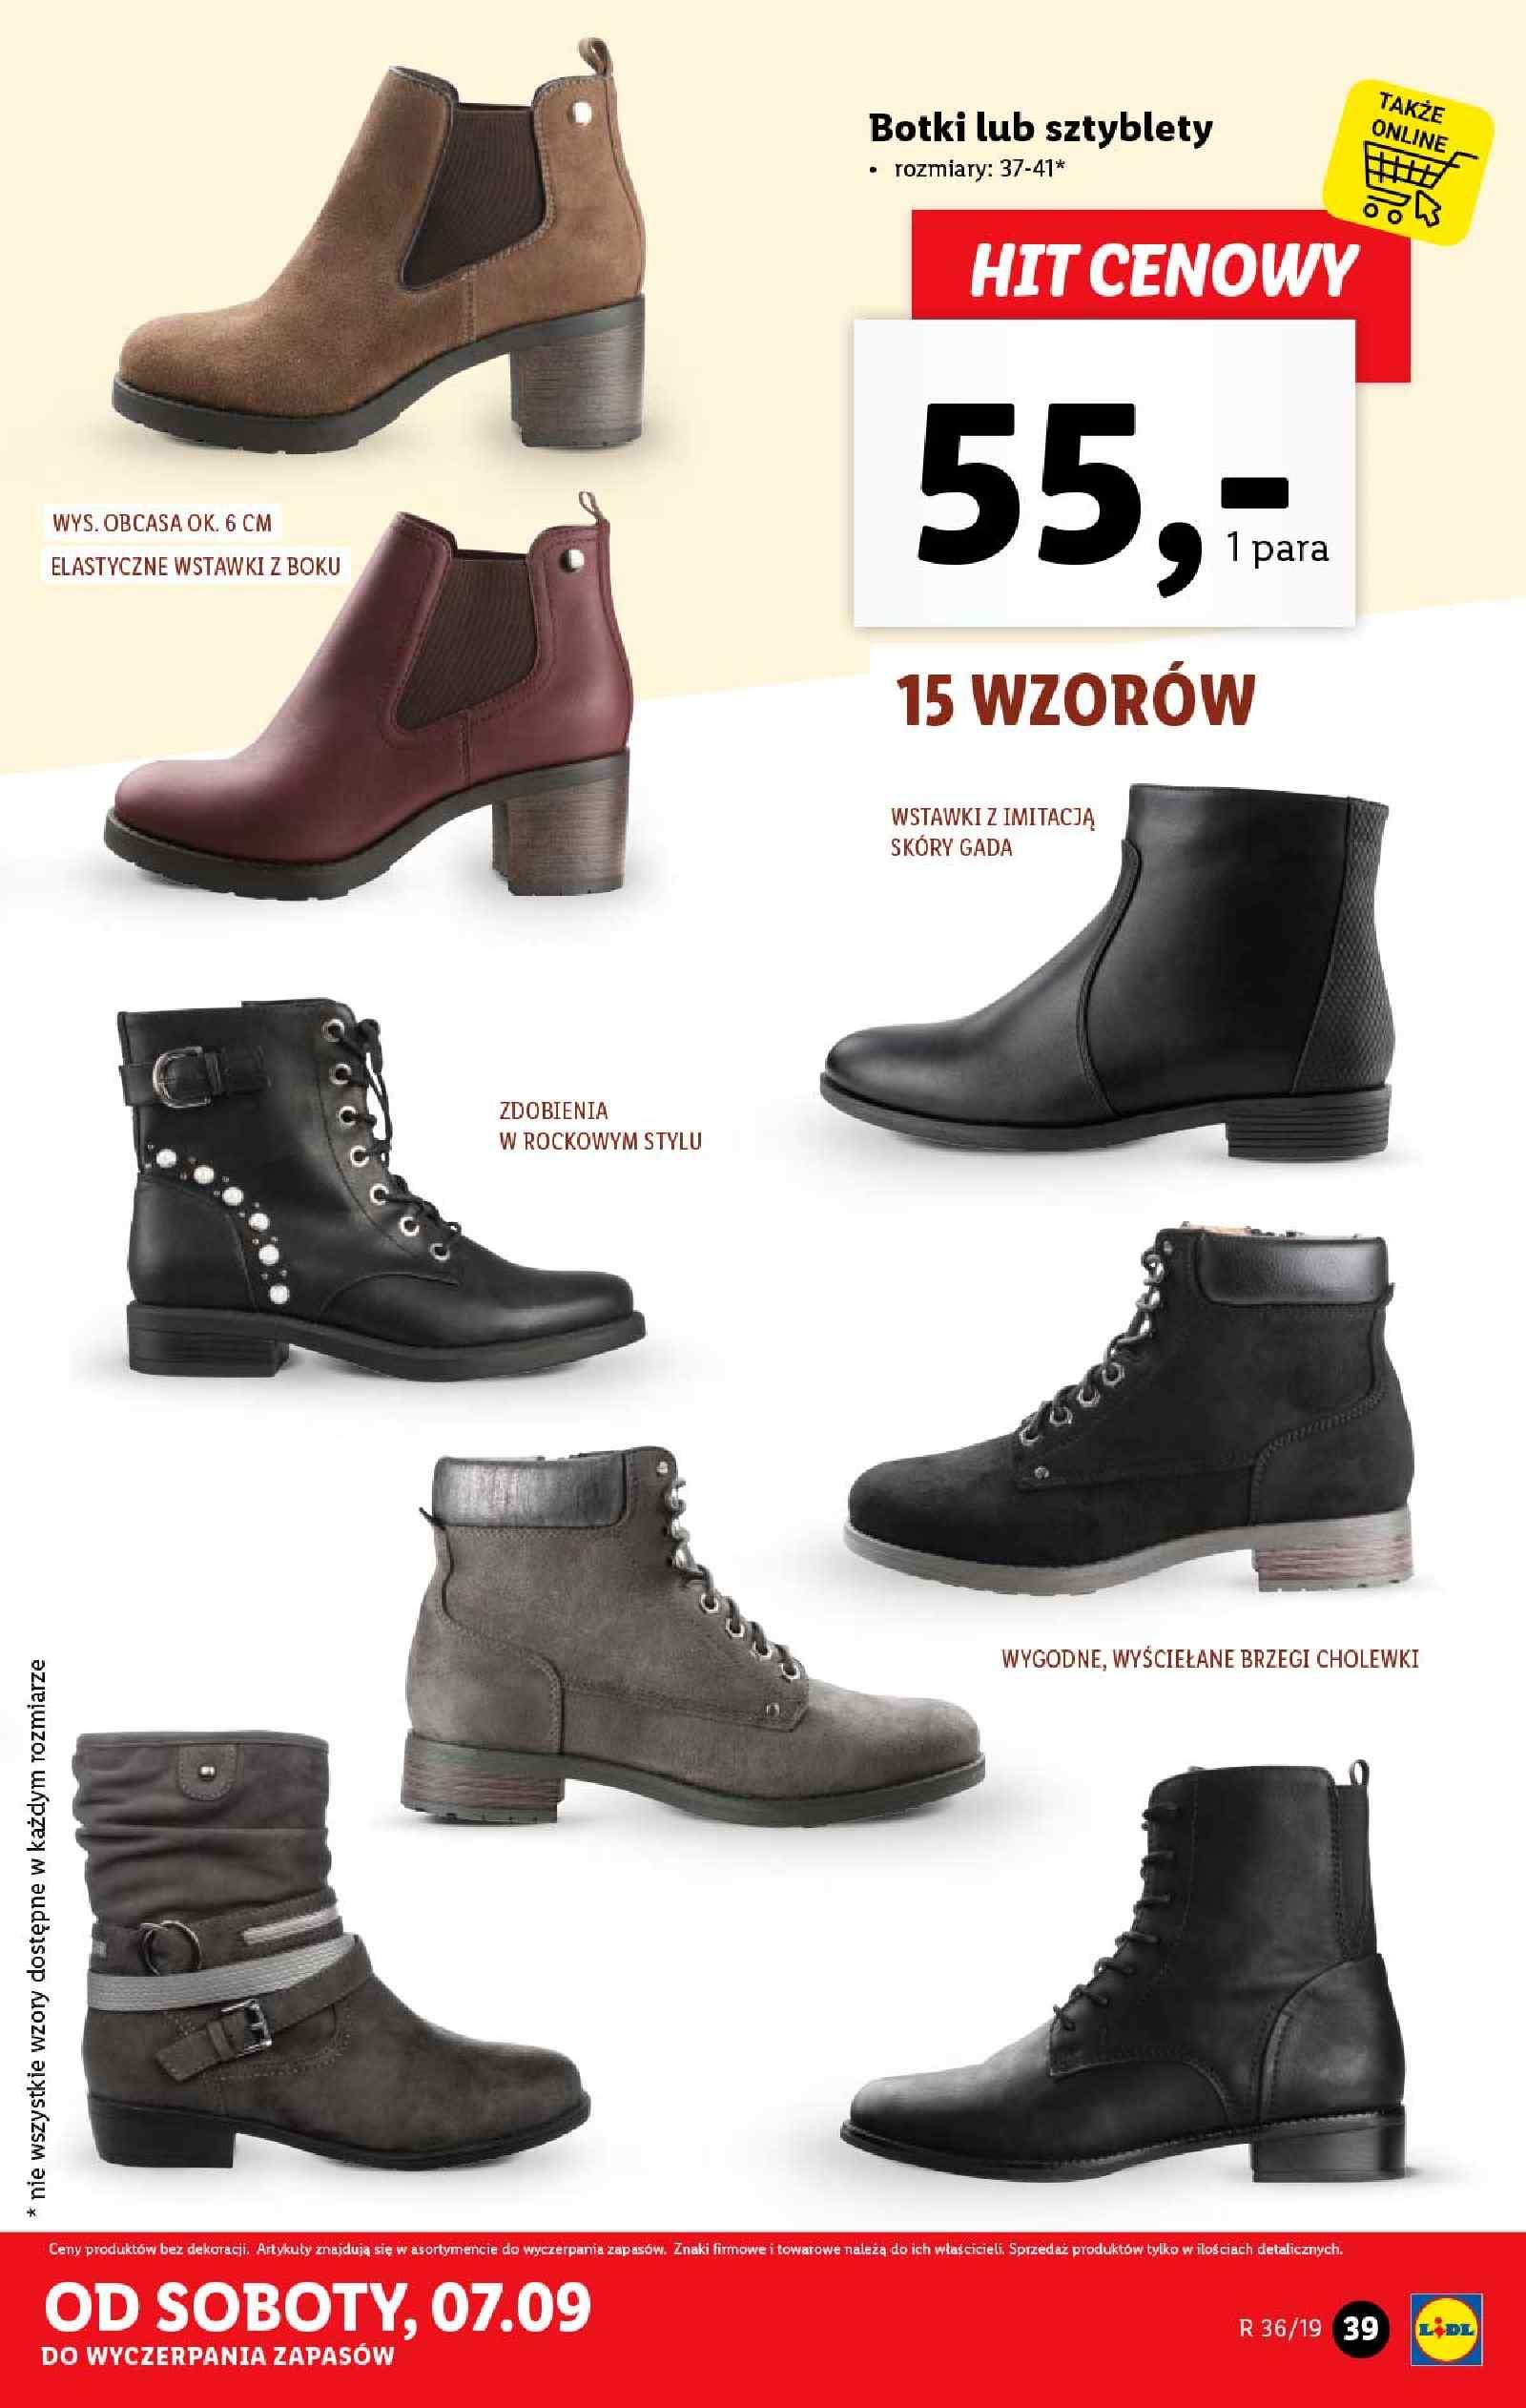 lidl work boots 2019